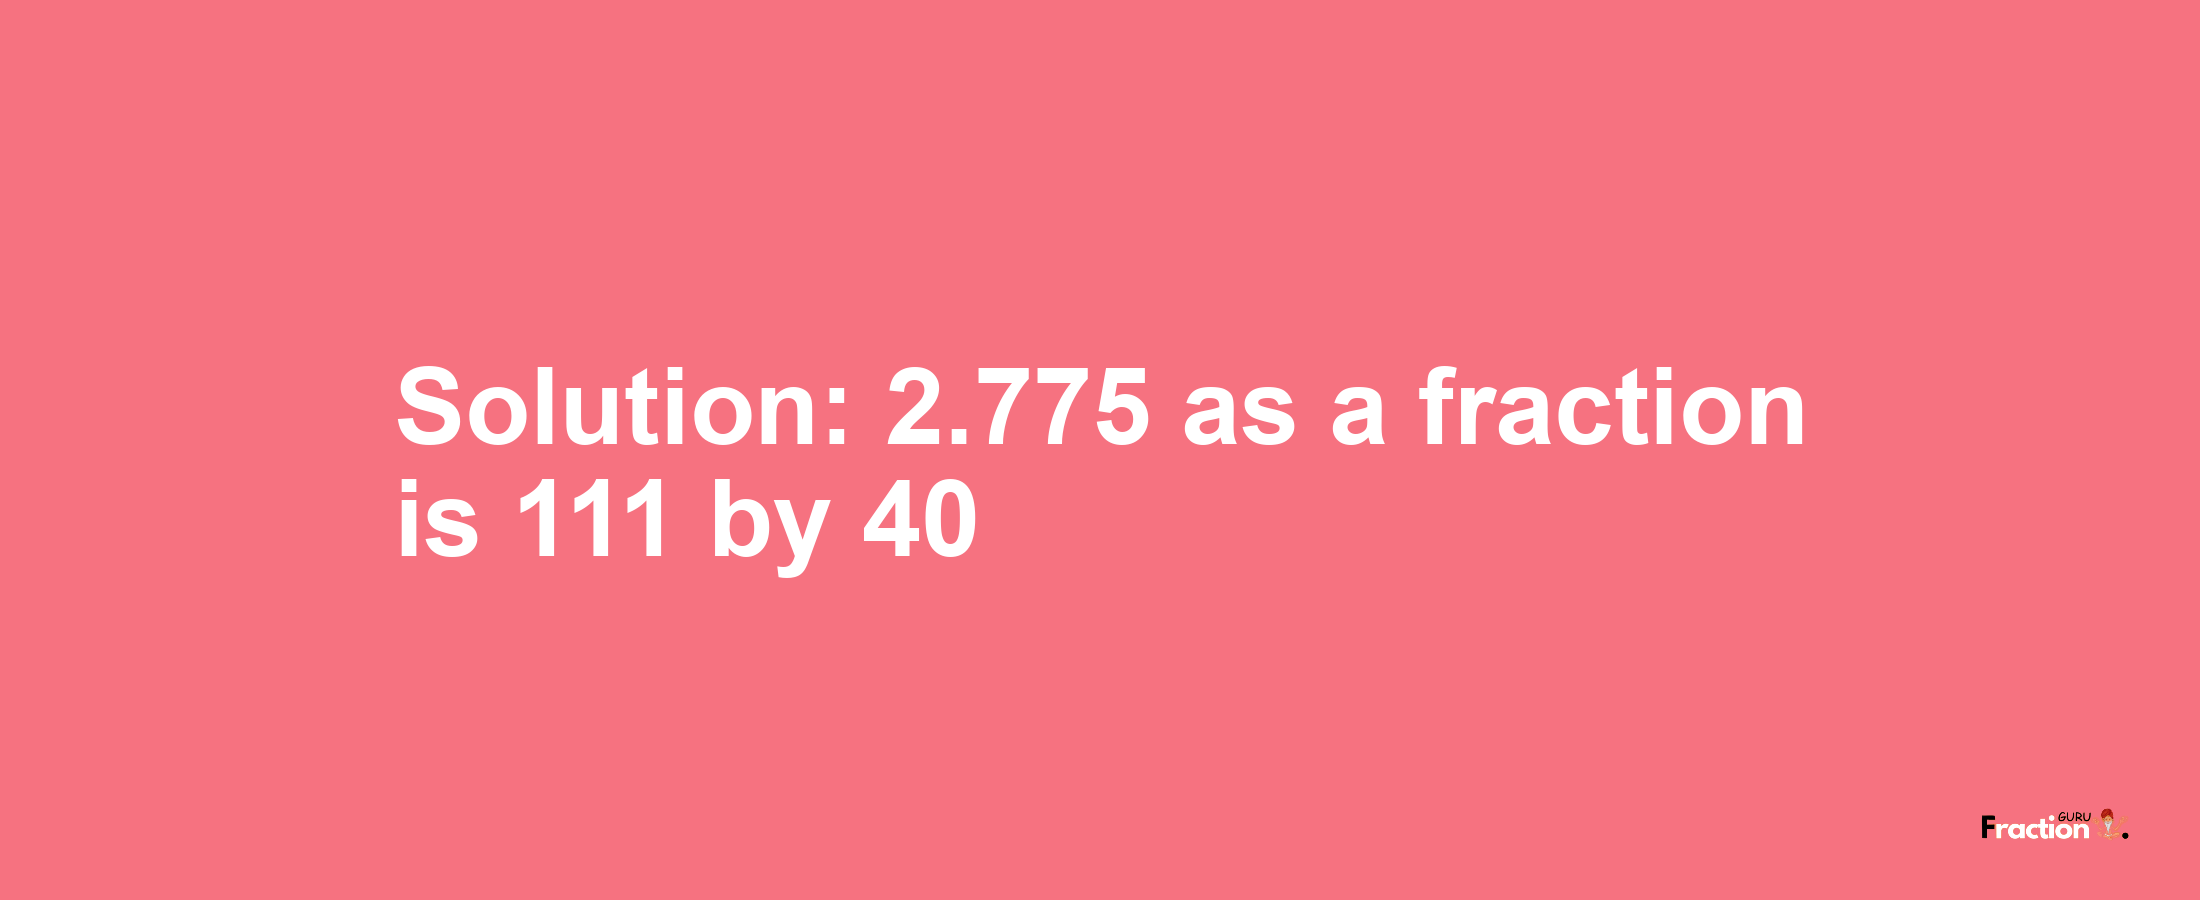 Solution:2.775 as a fraction is 111/40